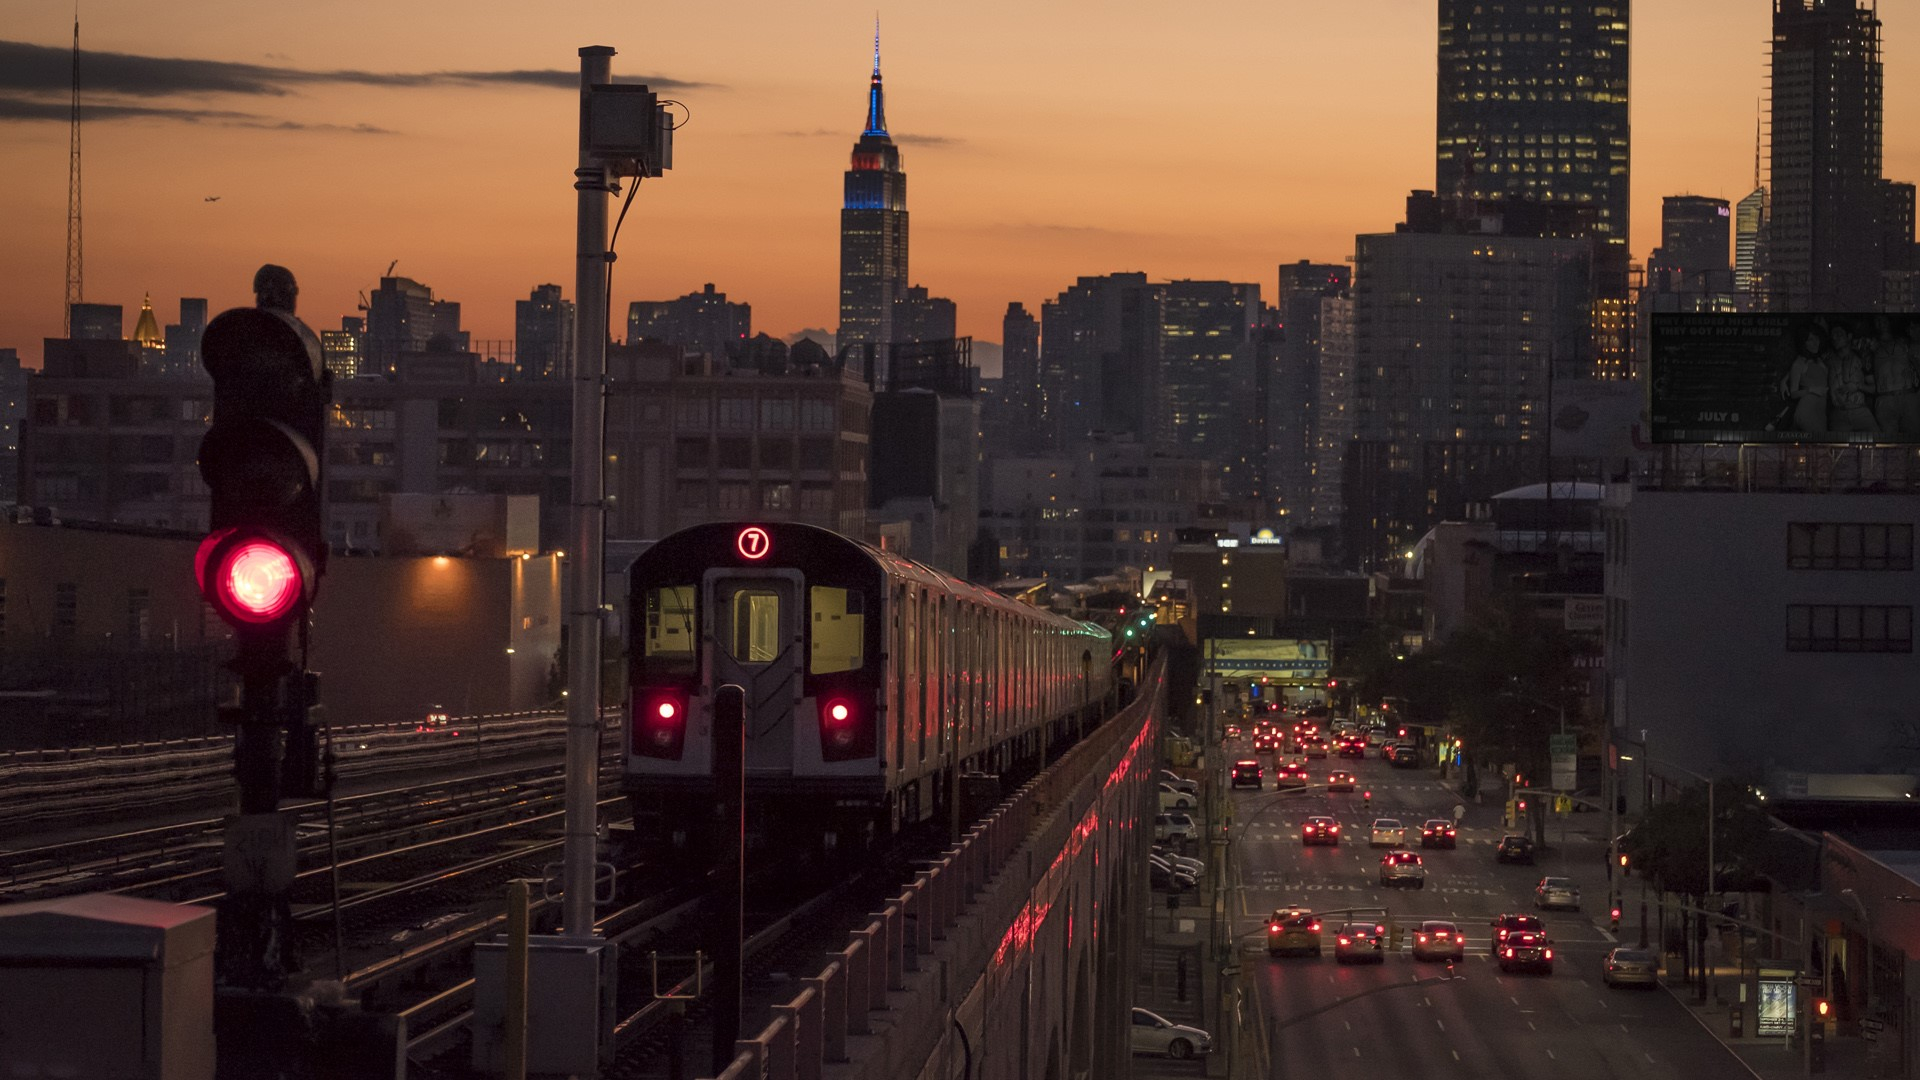 1920x1080 Wallpaper : train, car, road, tracks, railway, red light, building, skyscraper, cityscape, clouds, sky, poster, Empire State Building, Manhattan, New York City, USA RhazinGG 1780671 HD Wallpapers